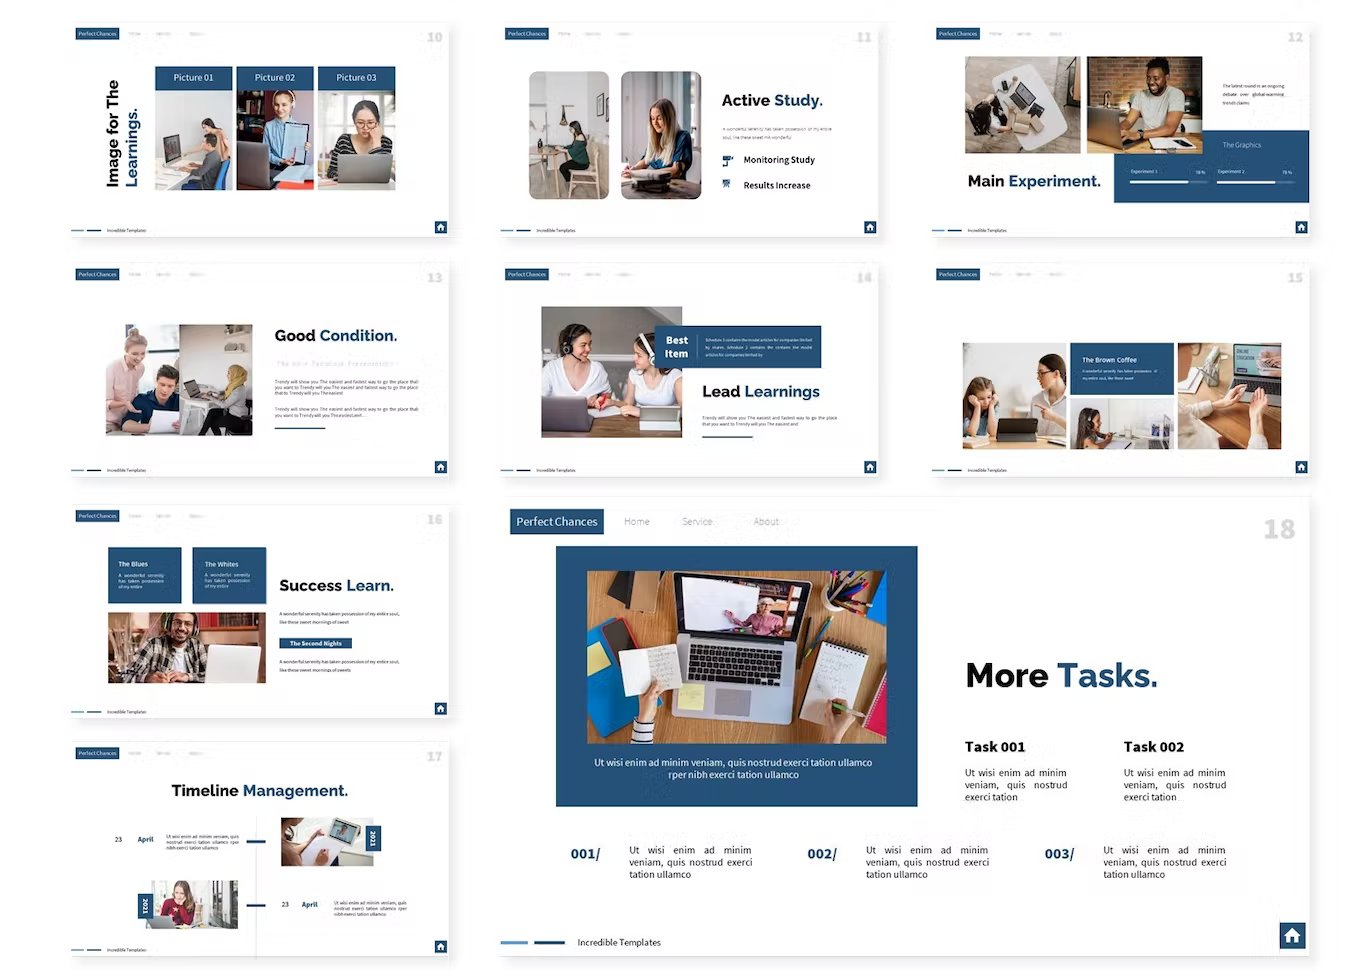 A set of 9 different techno learnings google slides templates in white, blue and black on a white background.